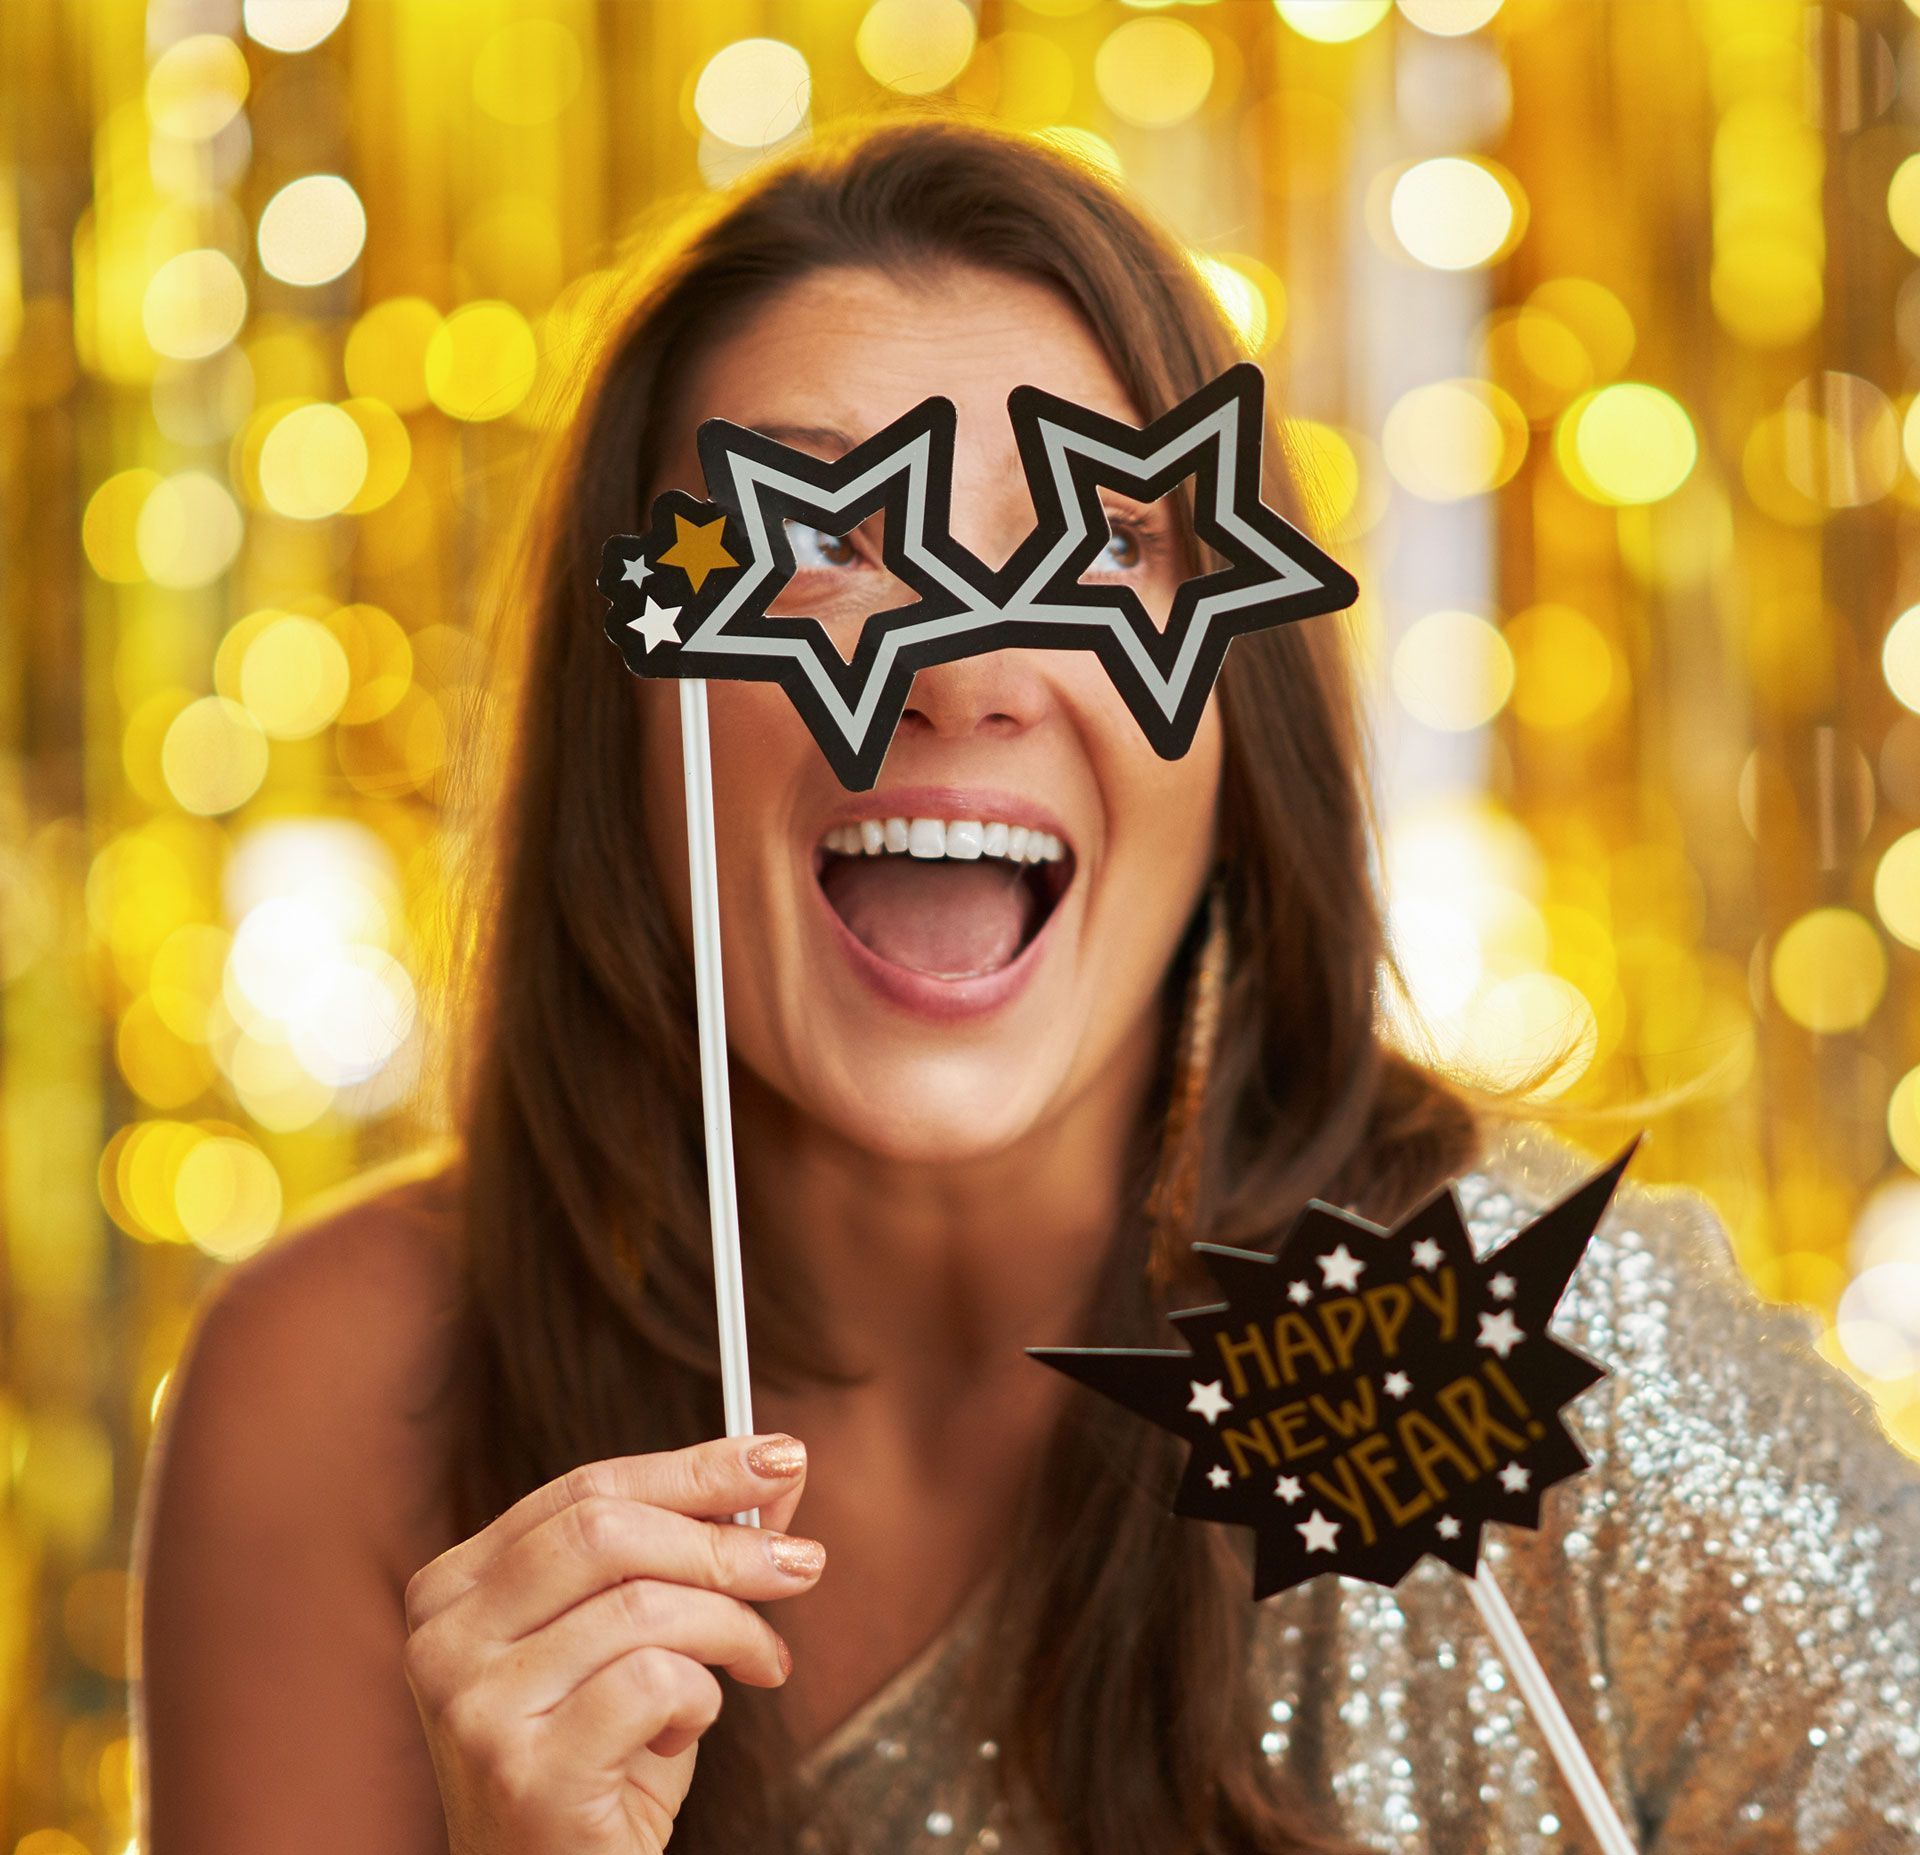 A woman is wearing a pair of star shaped glasses and holding a sign that says happy new year